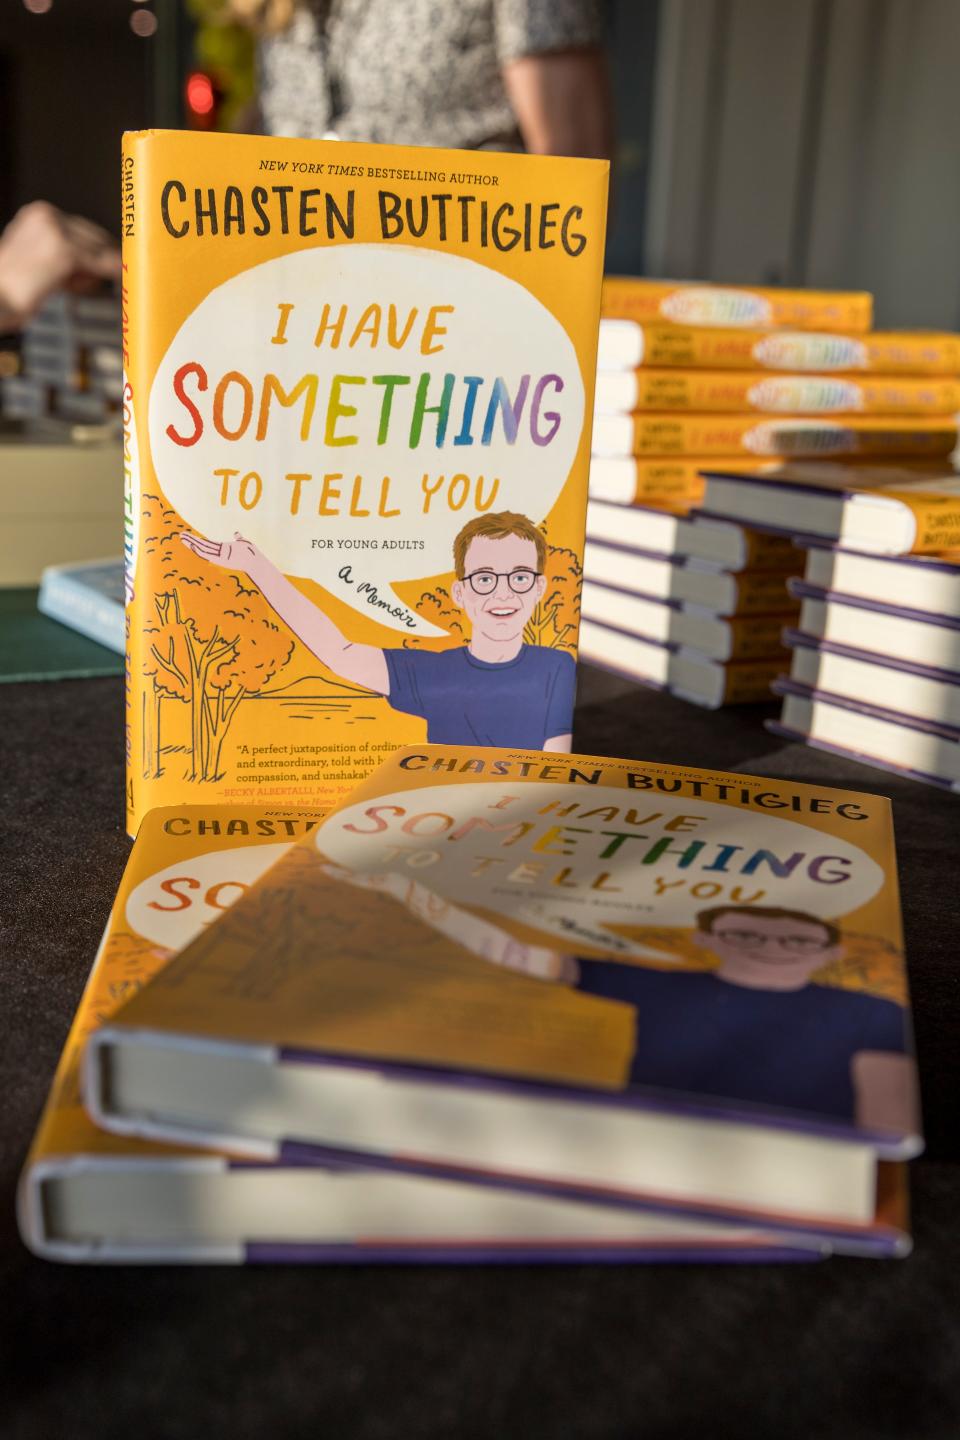 Copies of Chasten Glezman Buttigieg's book "I Have Something to Tell You - For Young Adults" are display at the Free Mom Hugs Conference at the Oklahoma City Convention Center. 
(Credit: Alonzo Adams, Alonzo Adams for The Oklahoman)